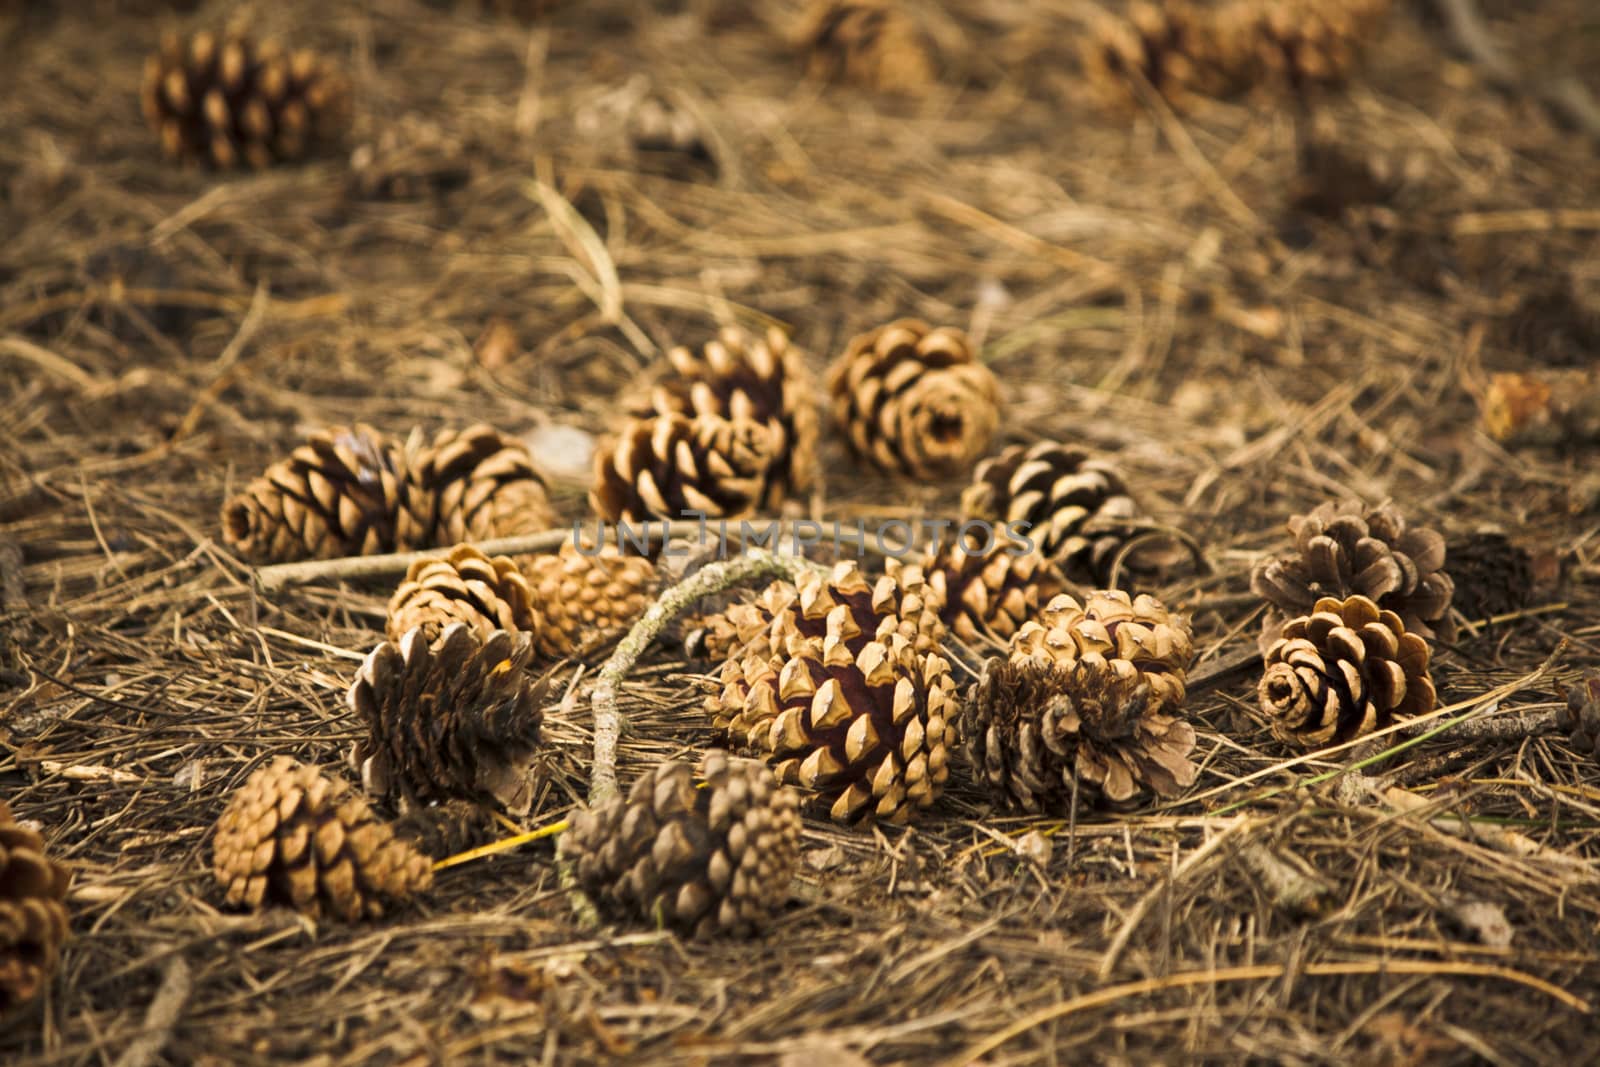 Pine cones and needles left on a woodland floor